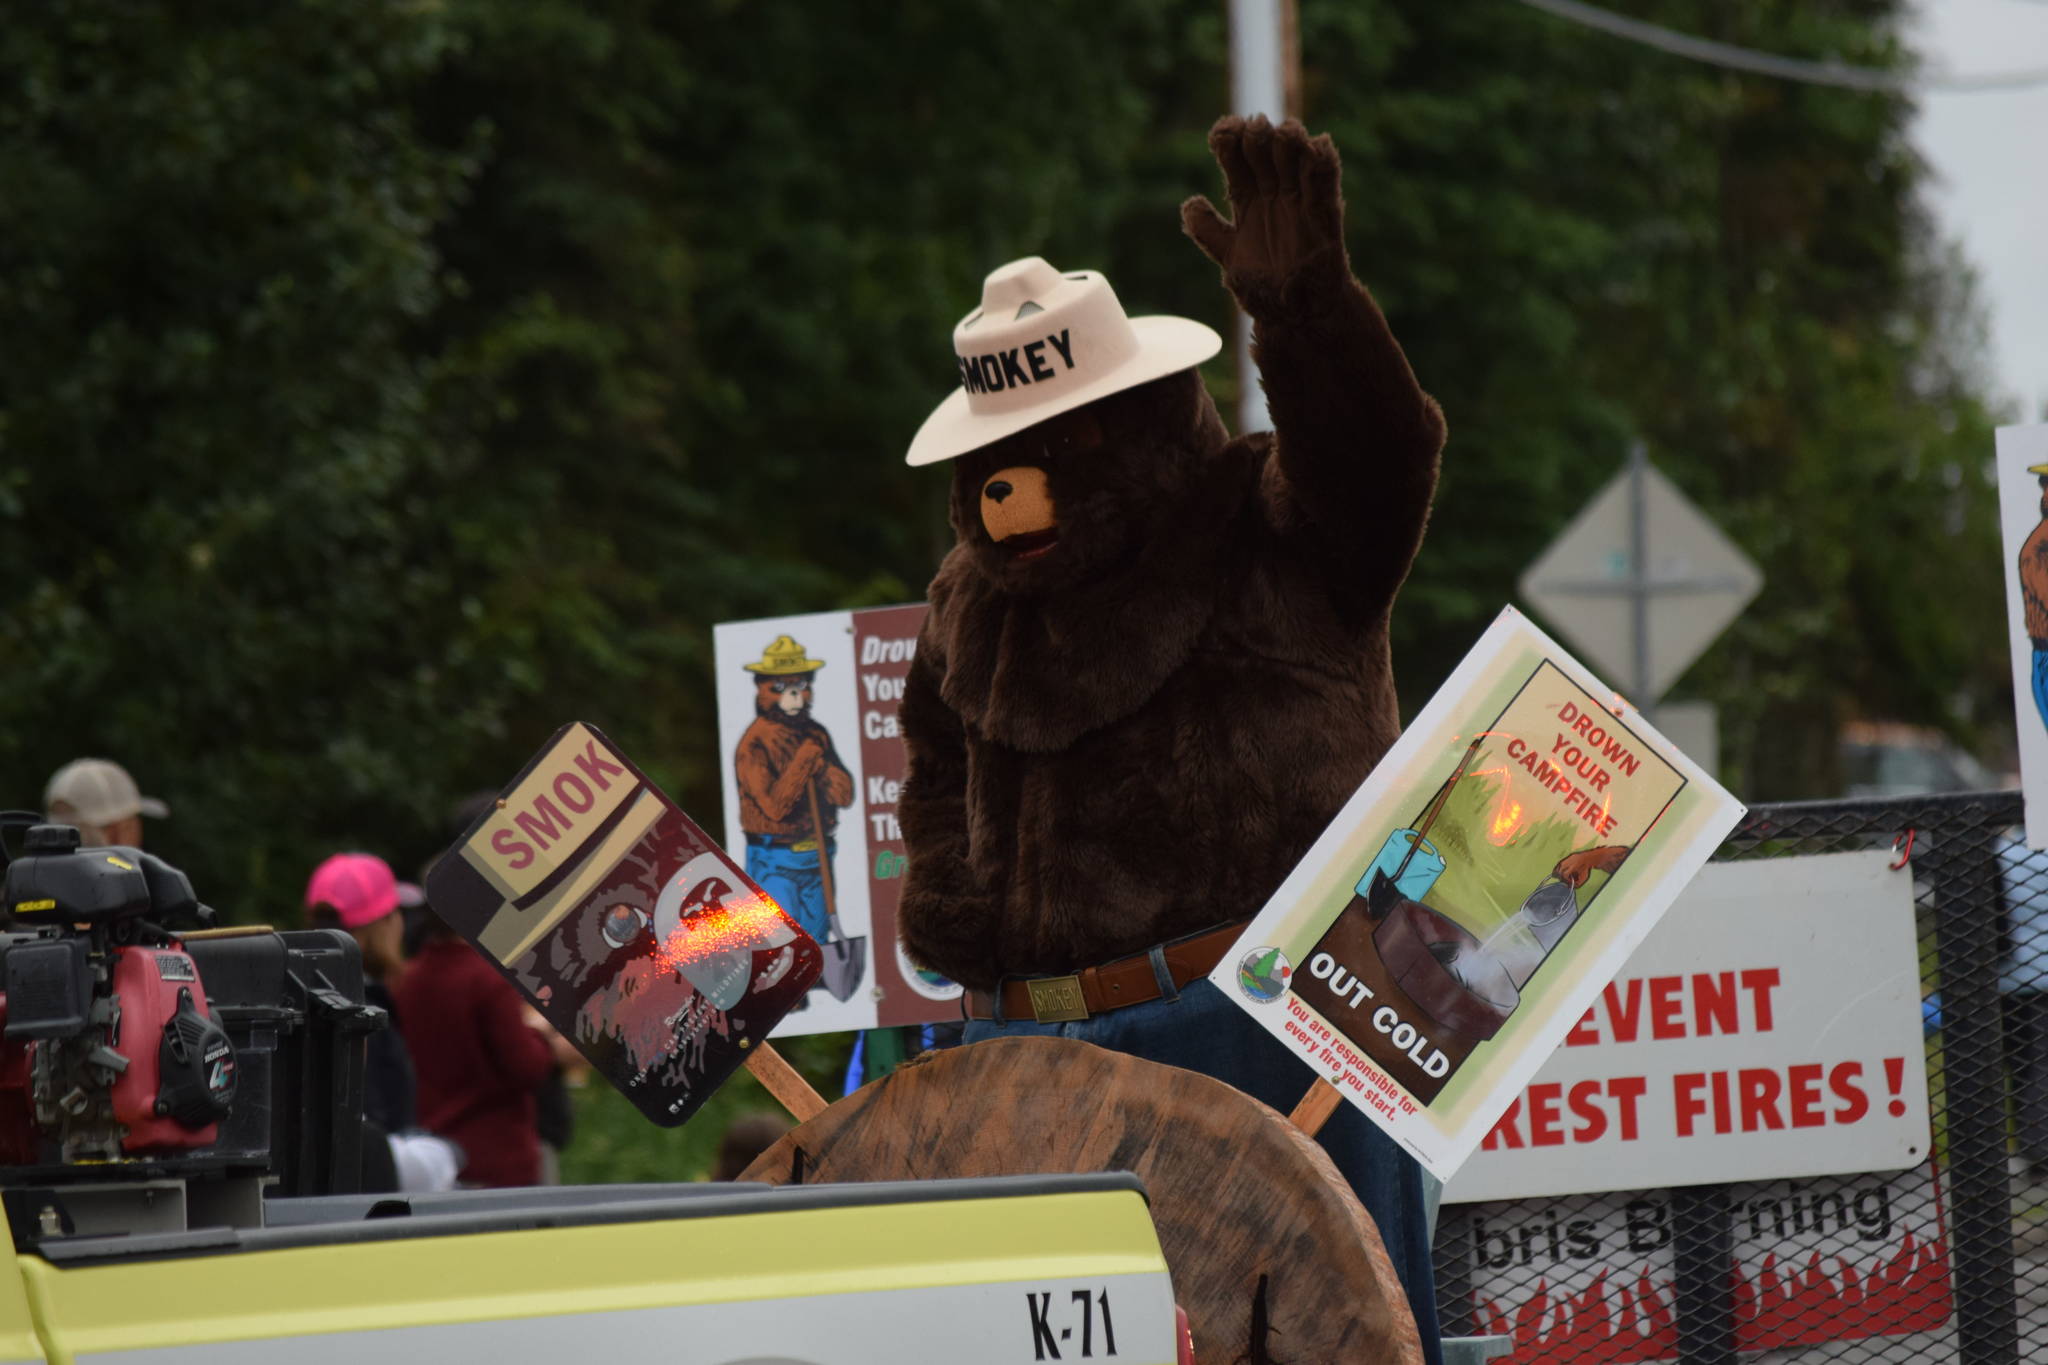 Smokey Bear waves to the crowd from the U.S. Forest Service float during the Soldotna Progress Days parade on Saturday, July 24, 2021. (Camille Botello / Peninsula Clarion)